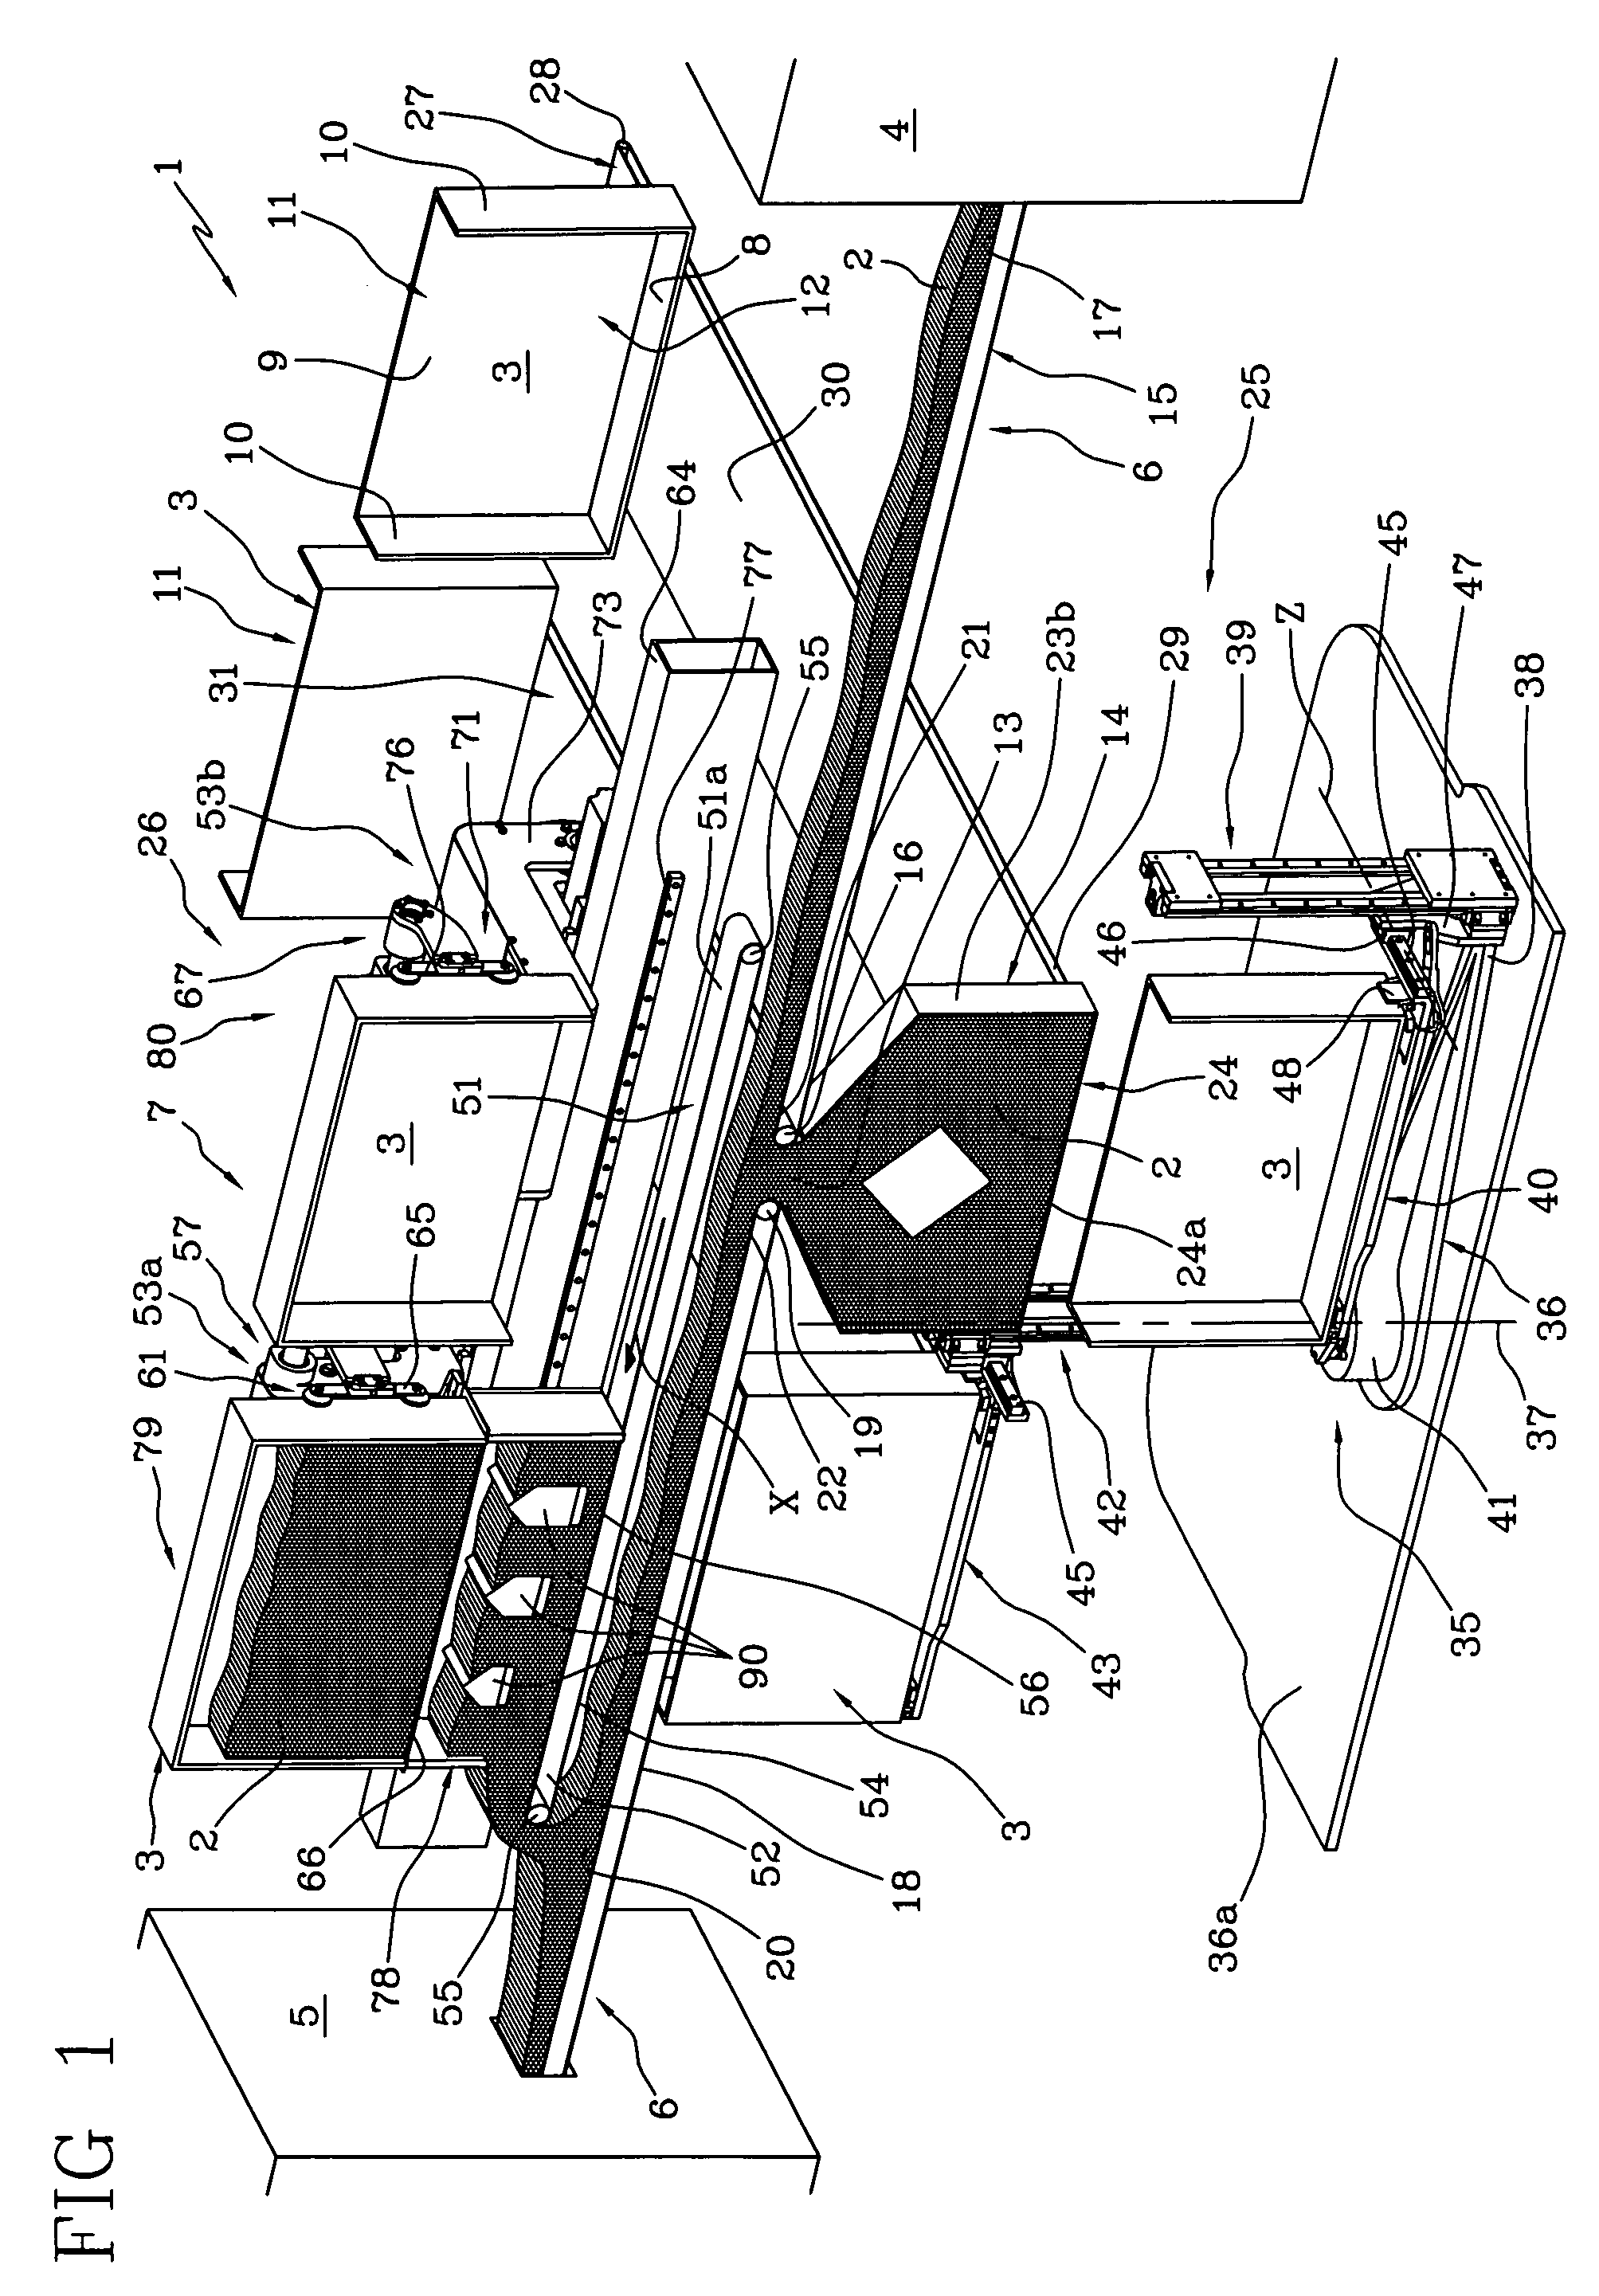 Method and equipment for batch handling and transfer of tobacco products